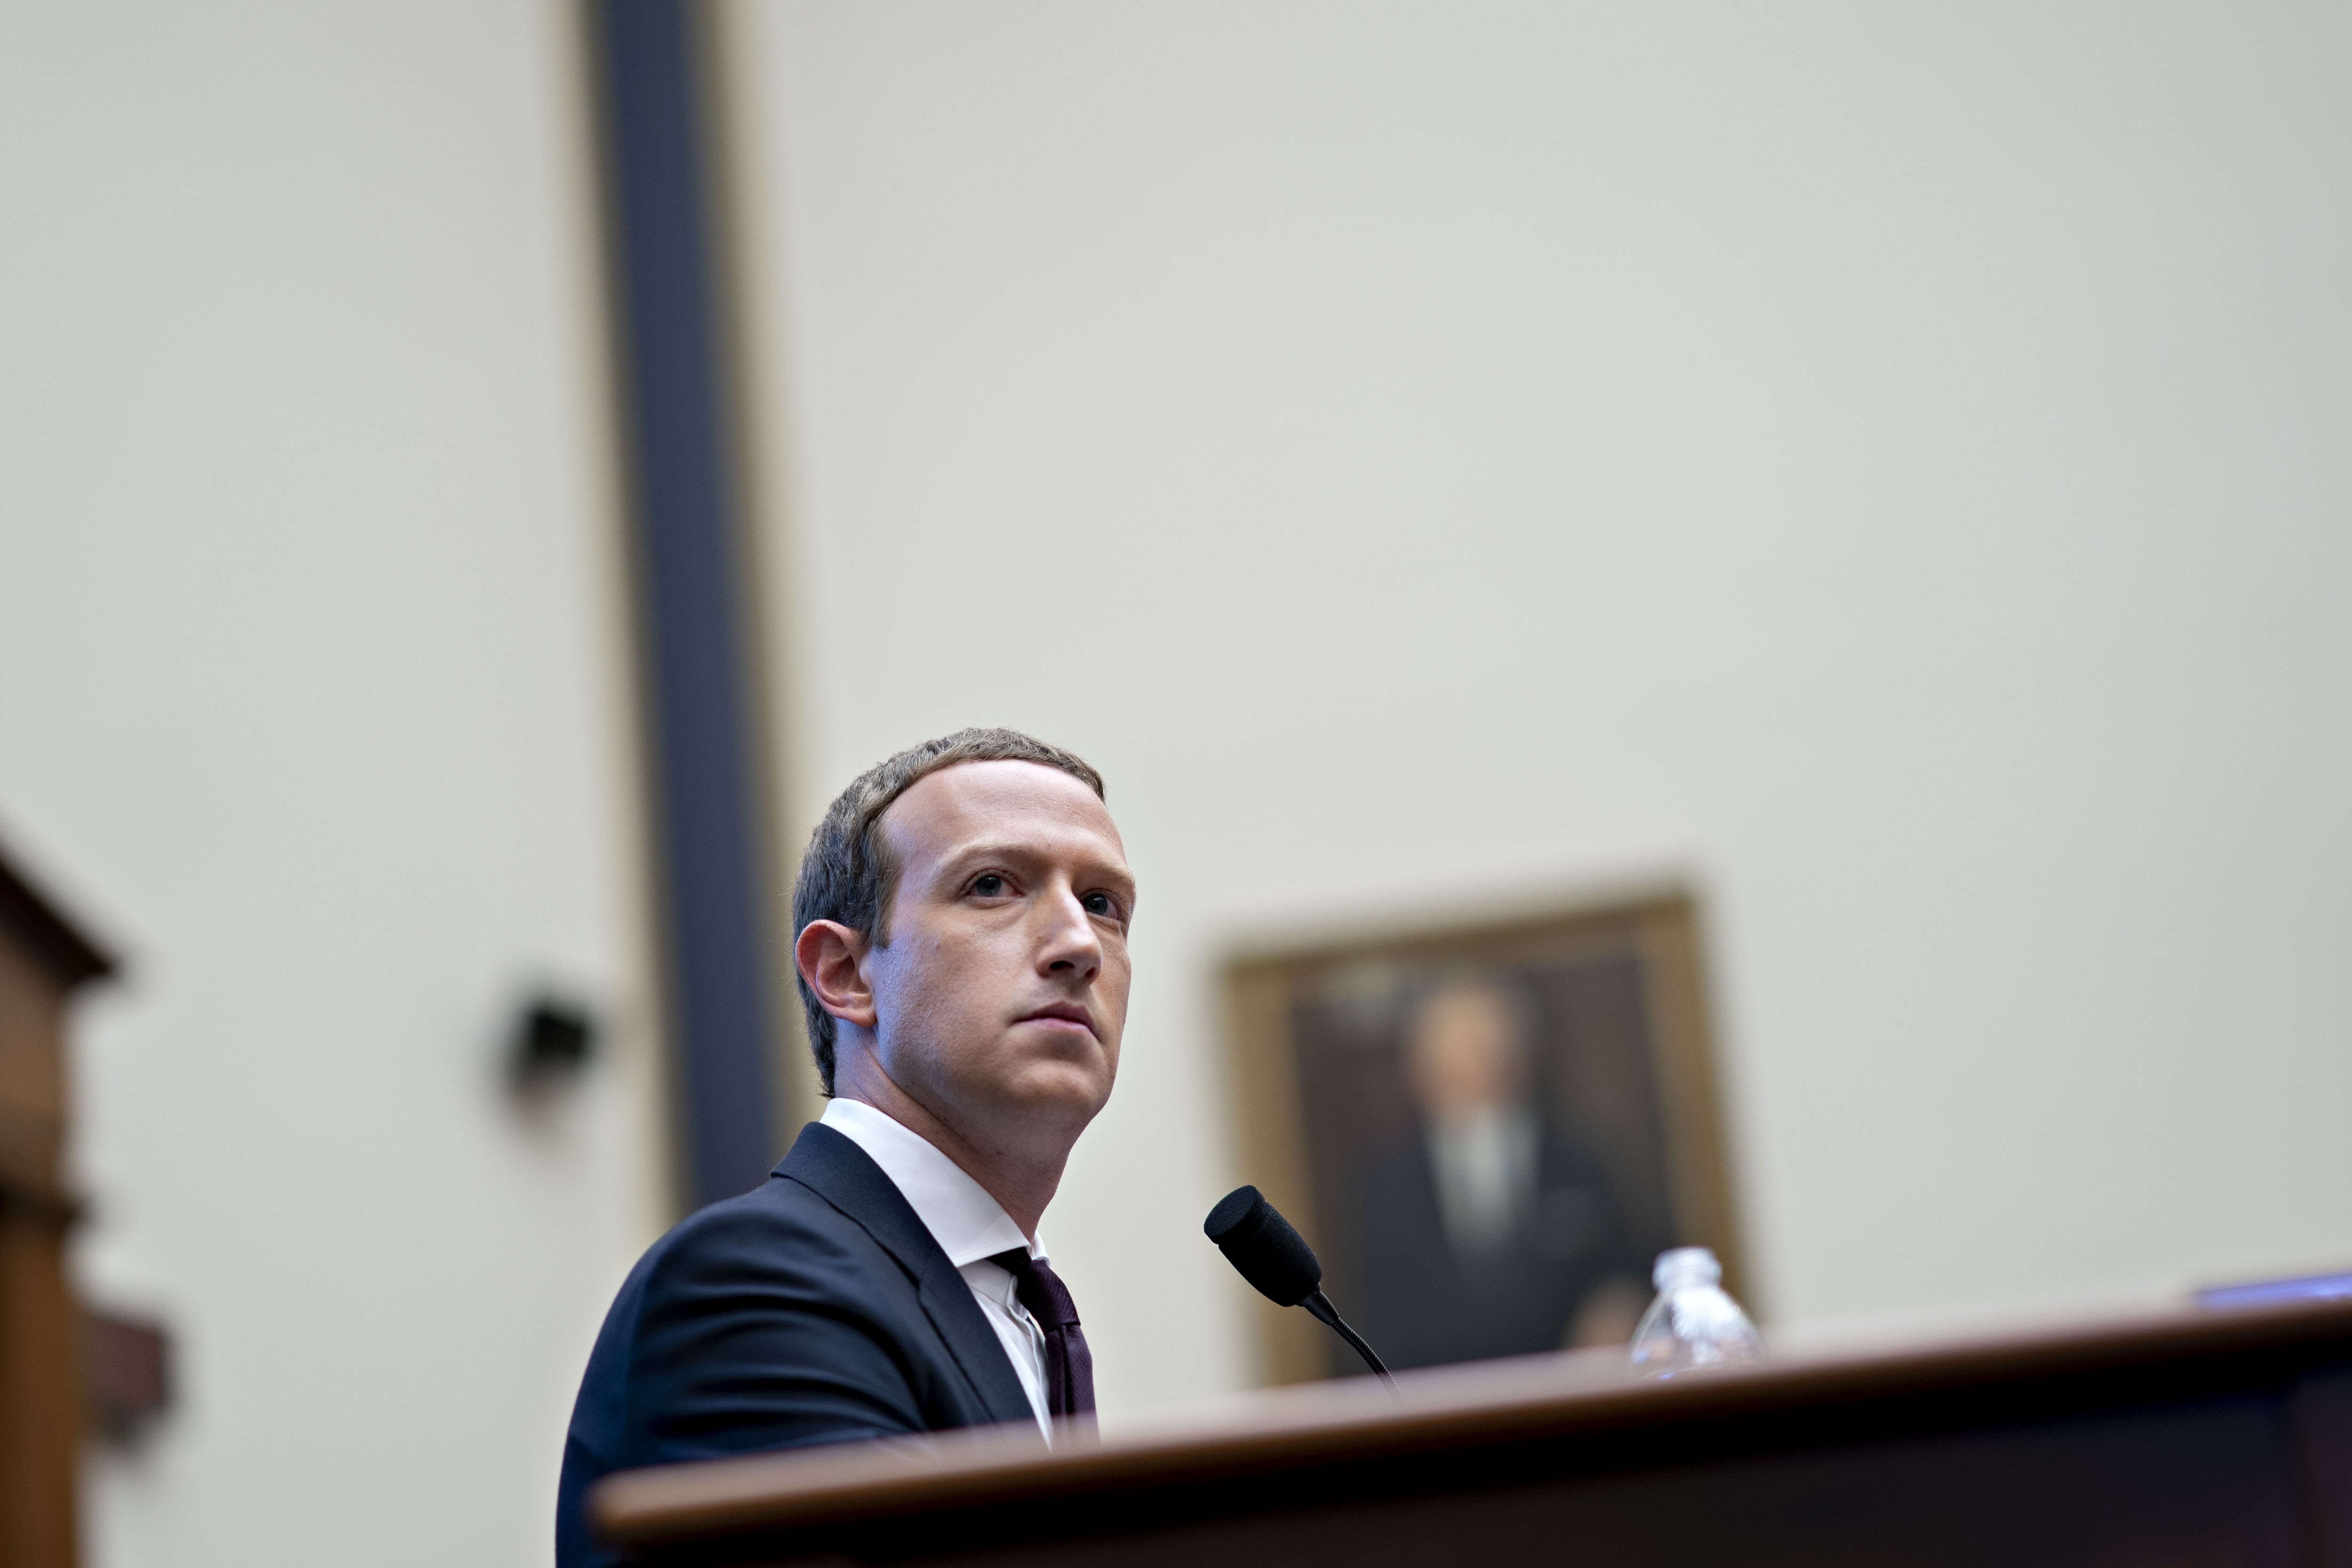 Mark Zuckerberg attends a House Financial Services Committee hearing in Washington, D.C., in 2019.